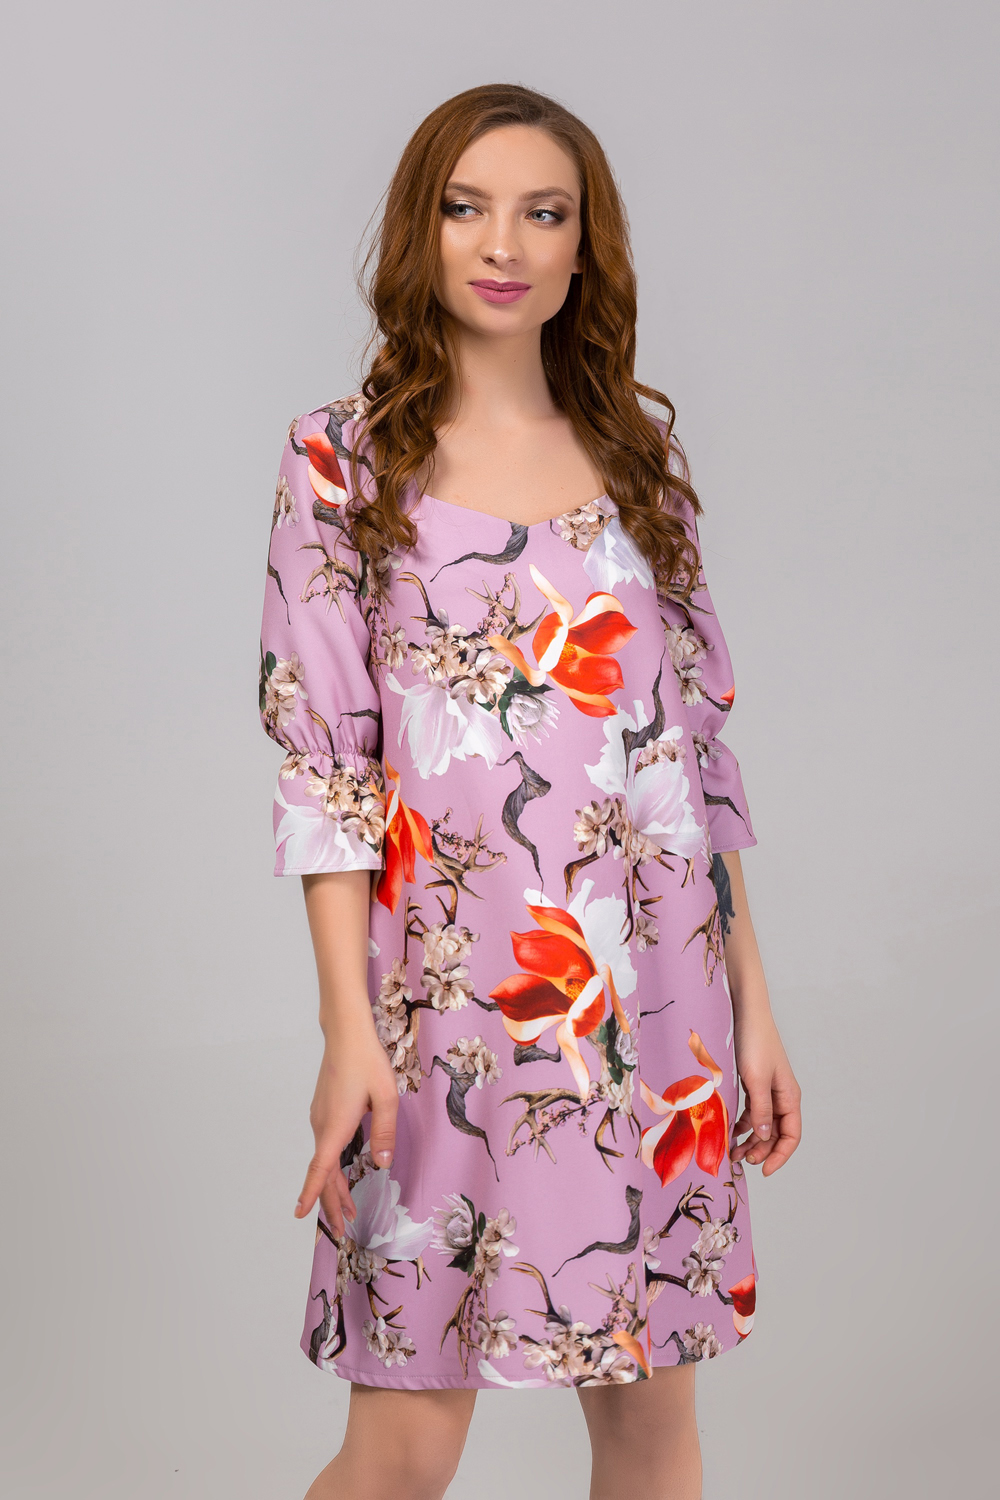 Dress in flowers with a ruffle on the sleeve